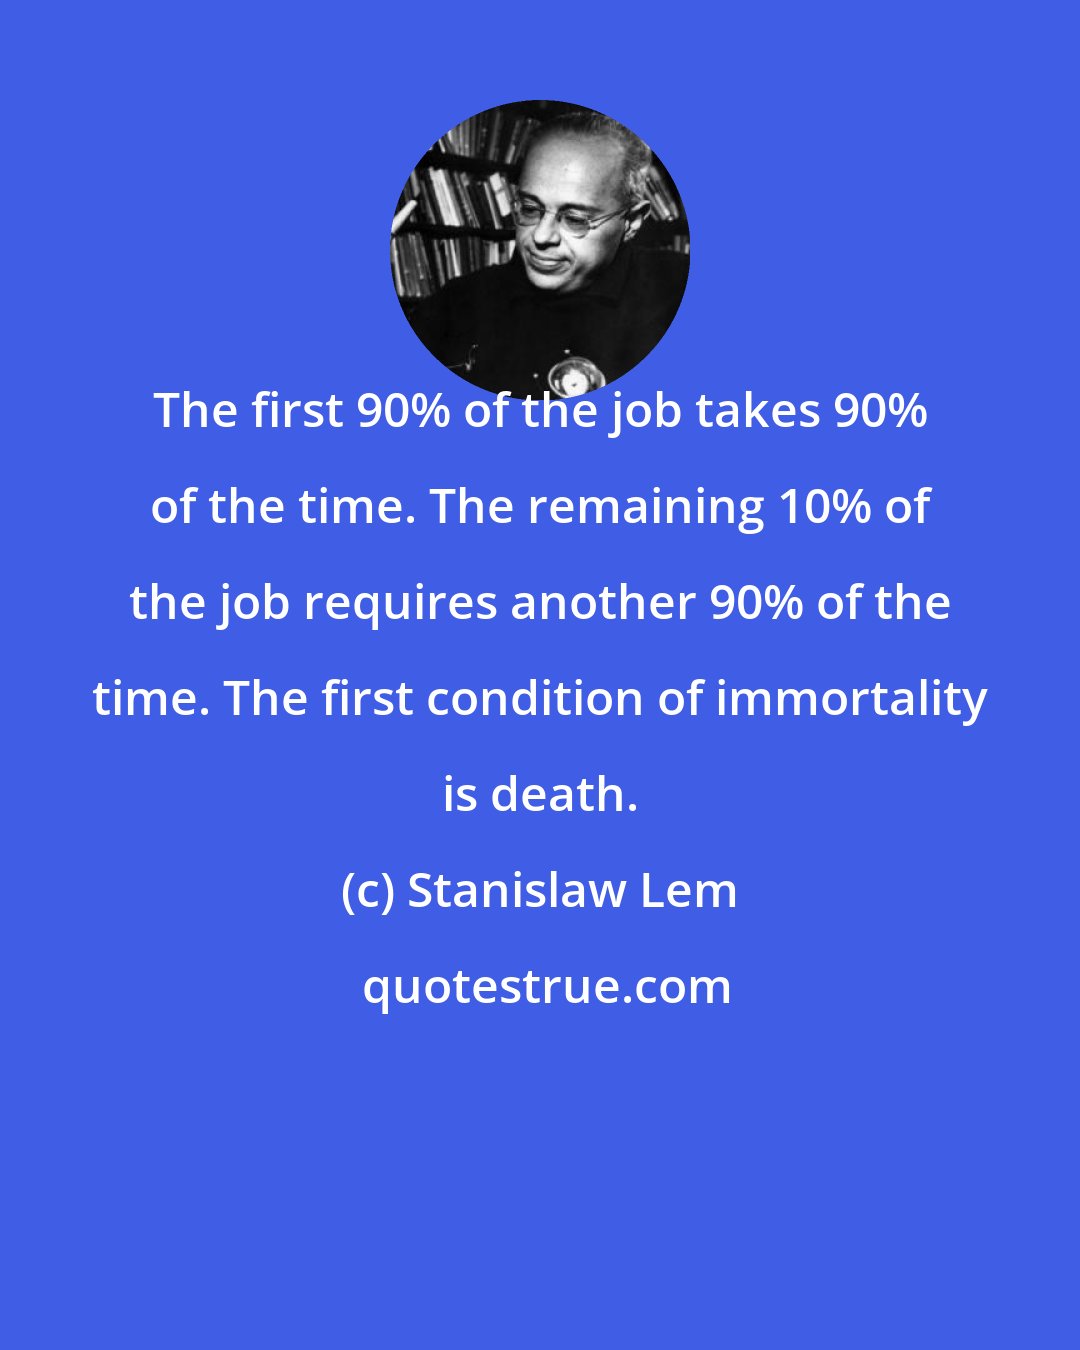 Stanislaw Lem: The first 90% of the job takes 90% of the time. The remaining 10% of the job requires another 90% of the time. The first condition of immortality is death.